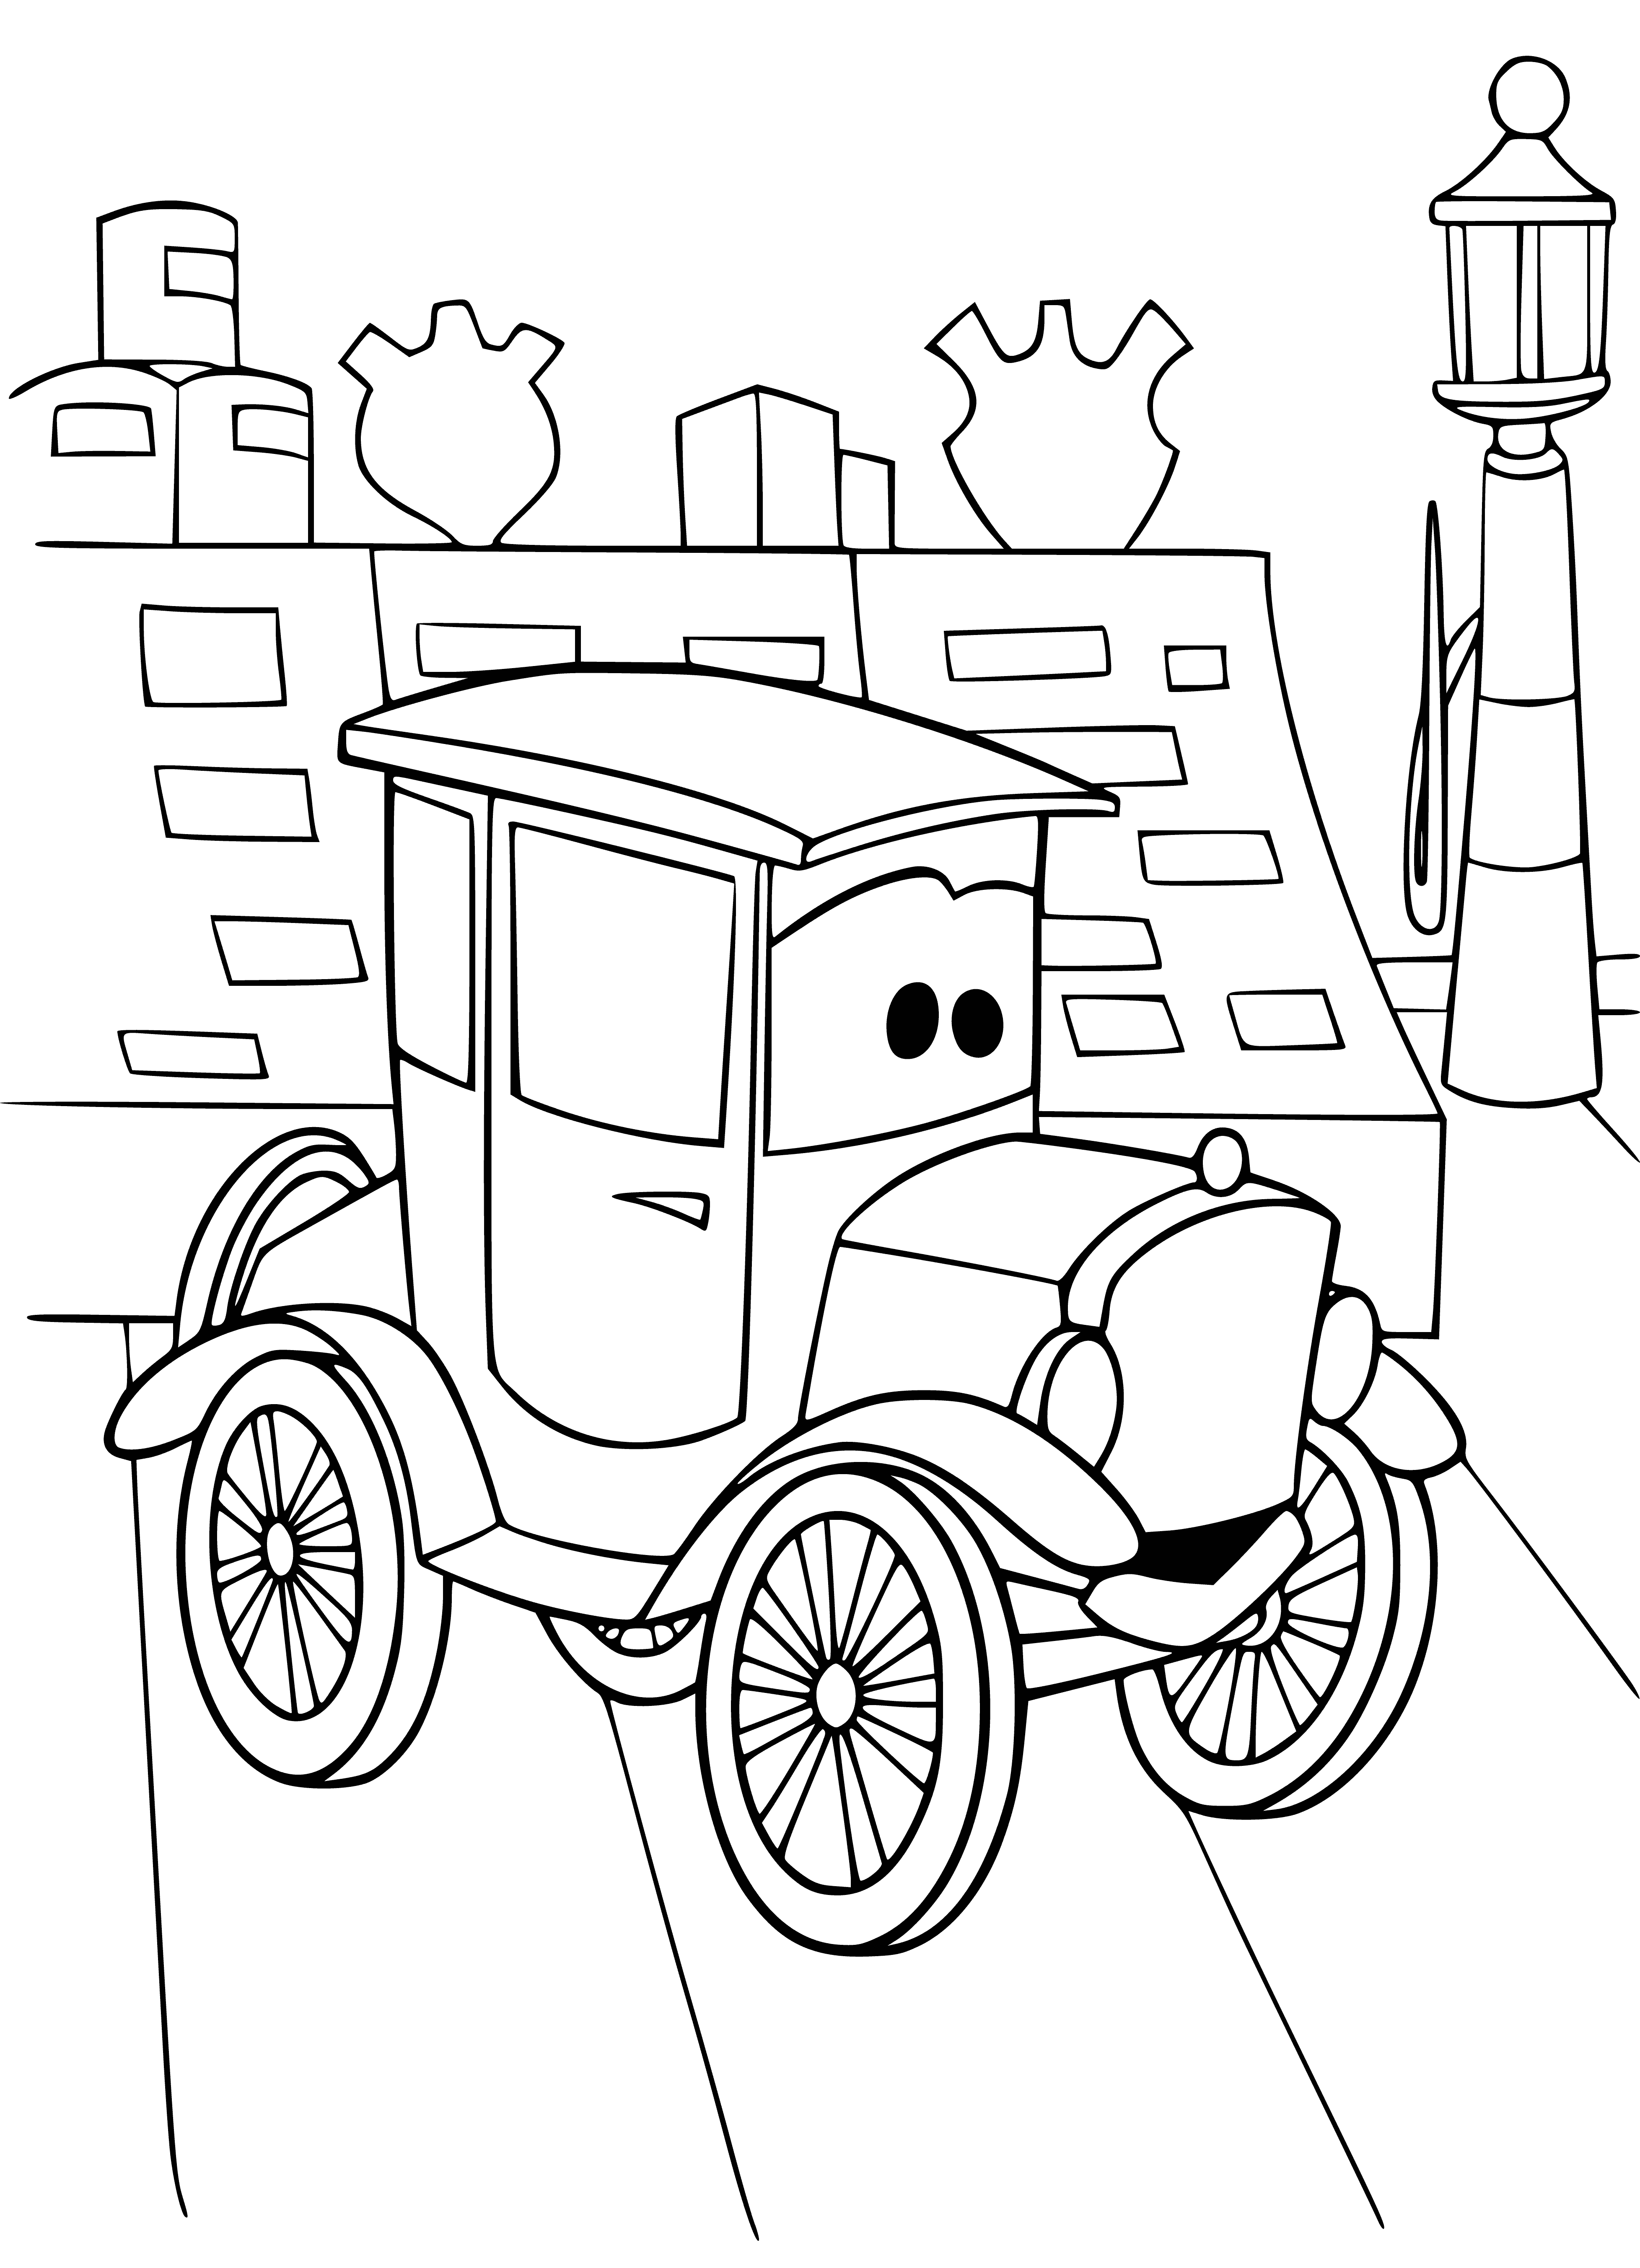 Old car coloring page